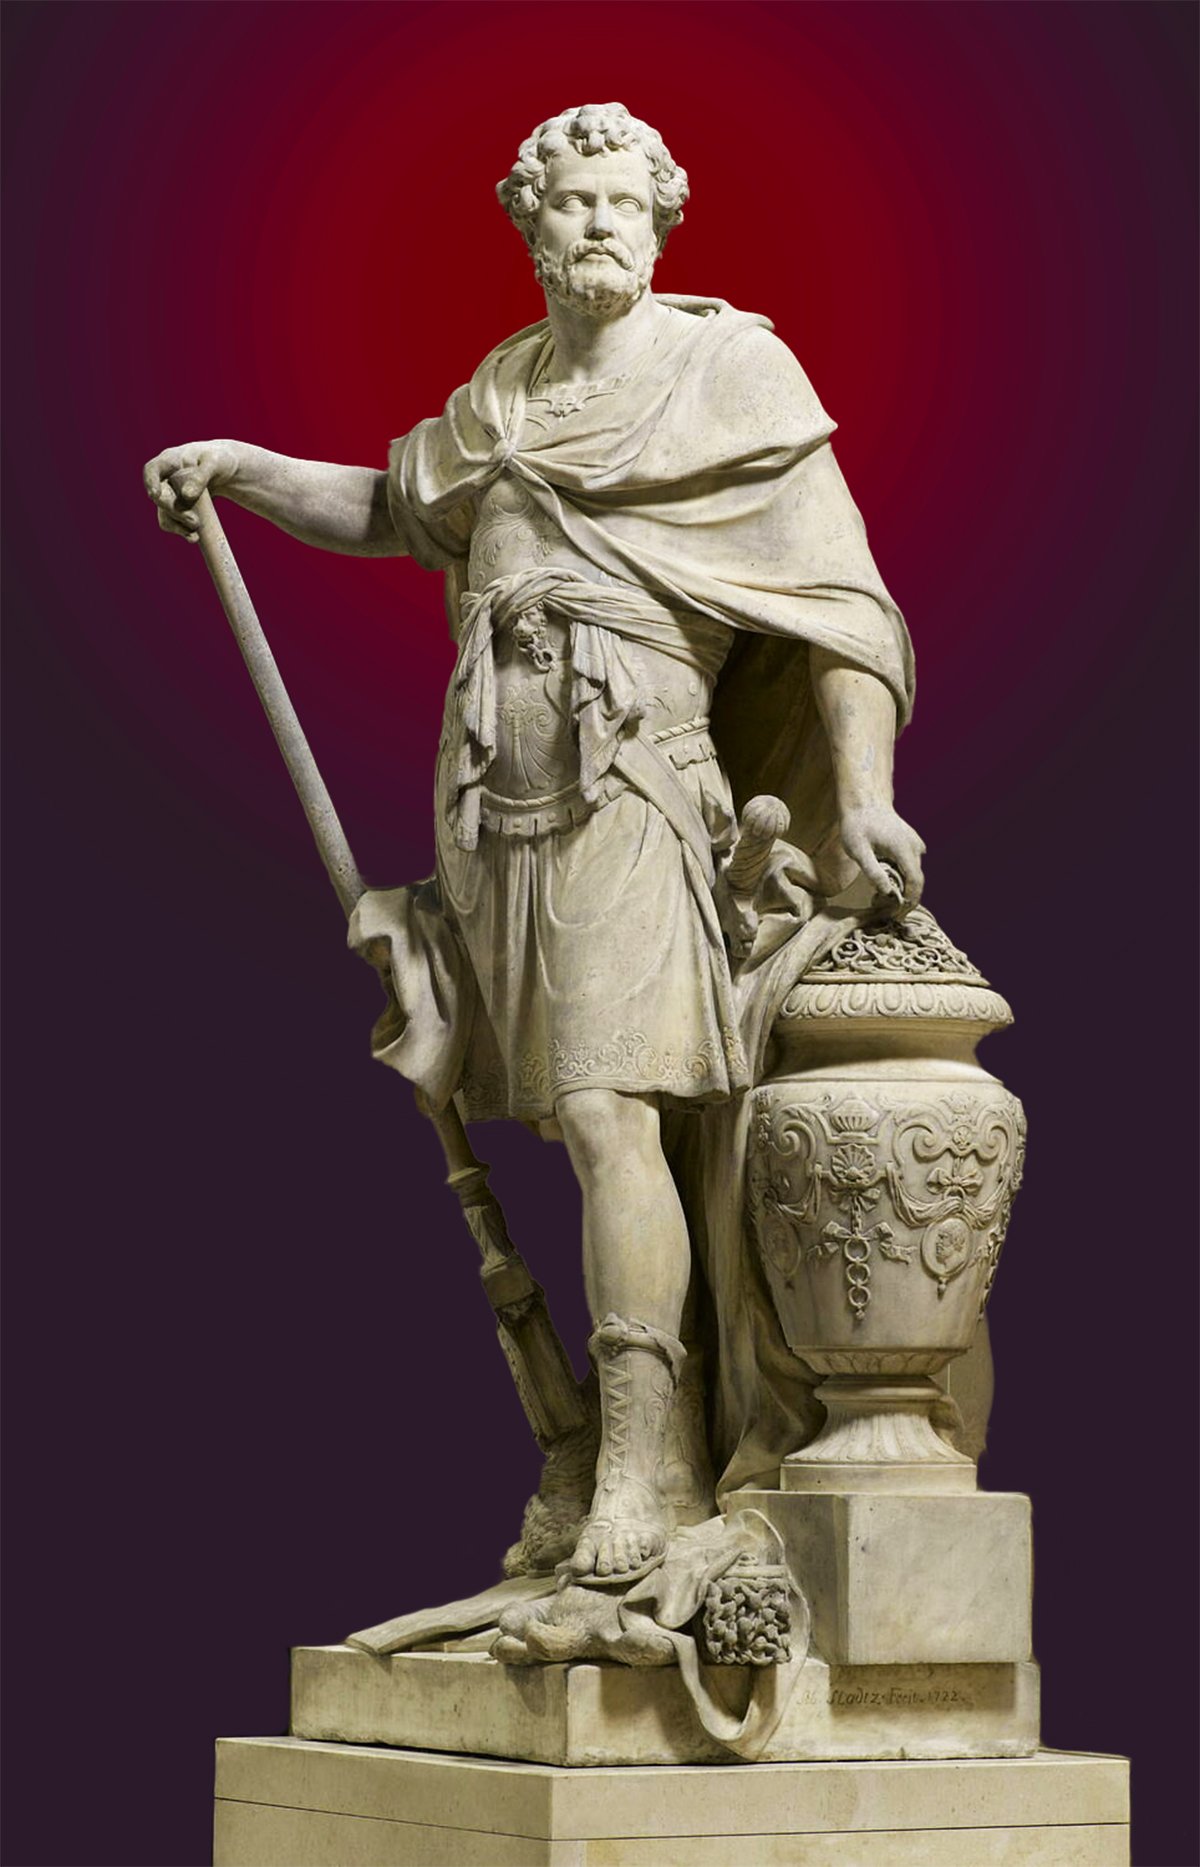 Marble statue of Hannibal Barca by Sebastian Slodtz, dated 1704. Hannibal stands poised, draped in a detailed robe and armor, holding a staff. His expression is determined, with curly hair and a beard. The statue is accentuated by an ornately carved pedestal featuring decorative motifs and an inscription at its base. The richly hued purple background contrasts with the white of the marble, highlighting the statue's details.